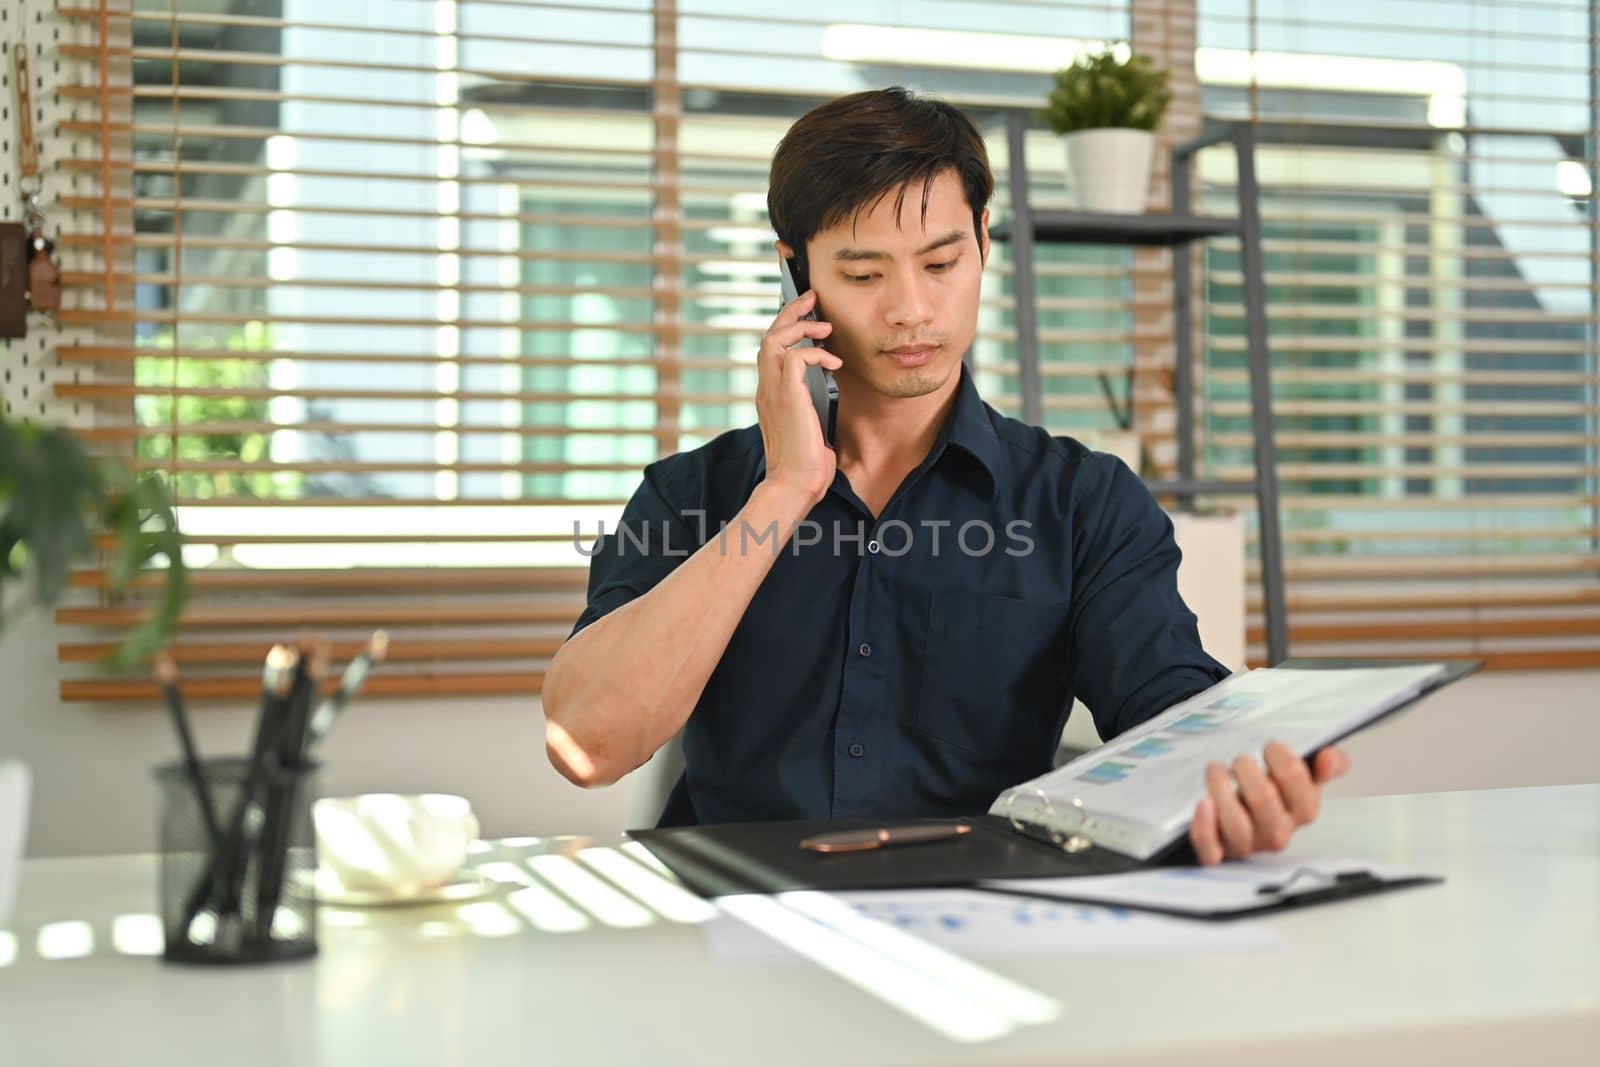 Attractive asian man having phone conversation while working remotely from home.